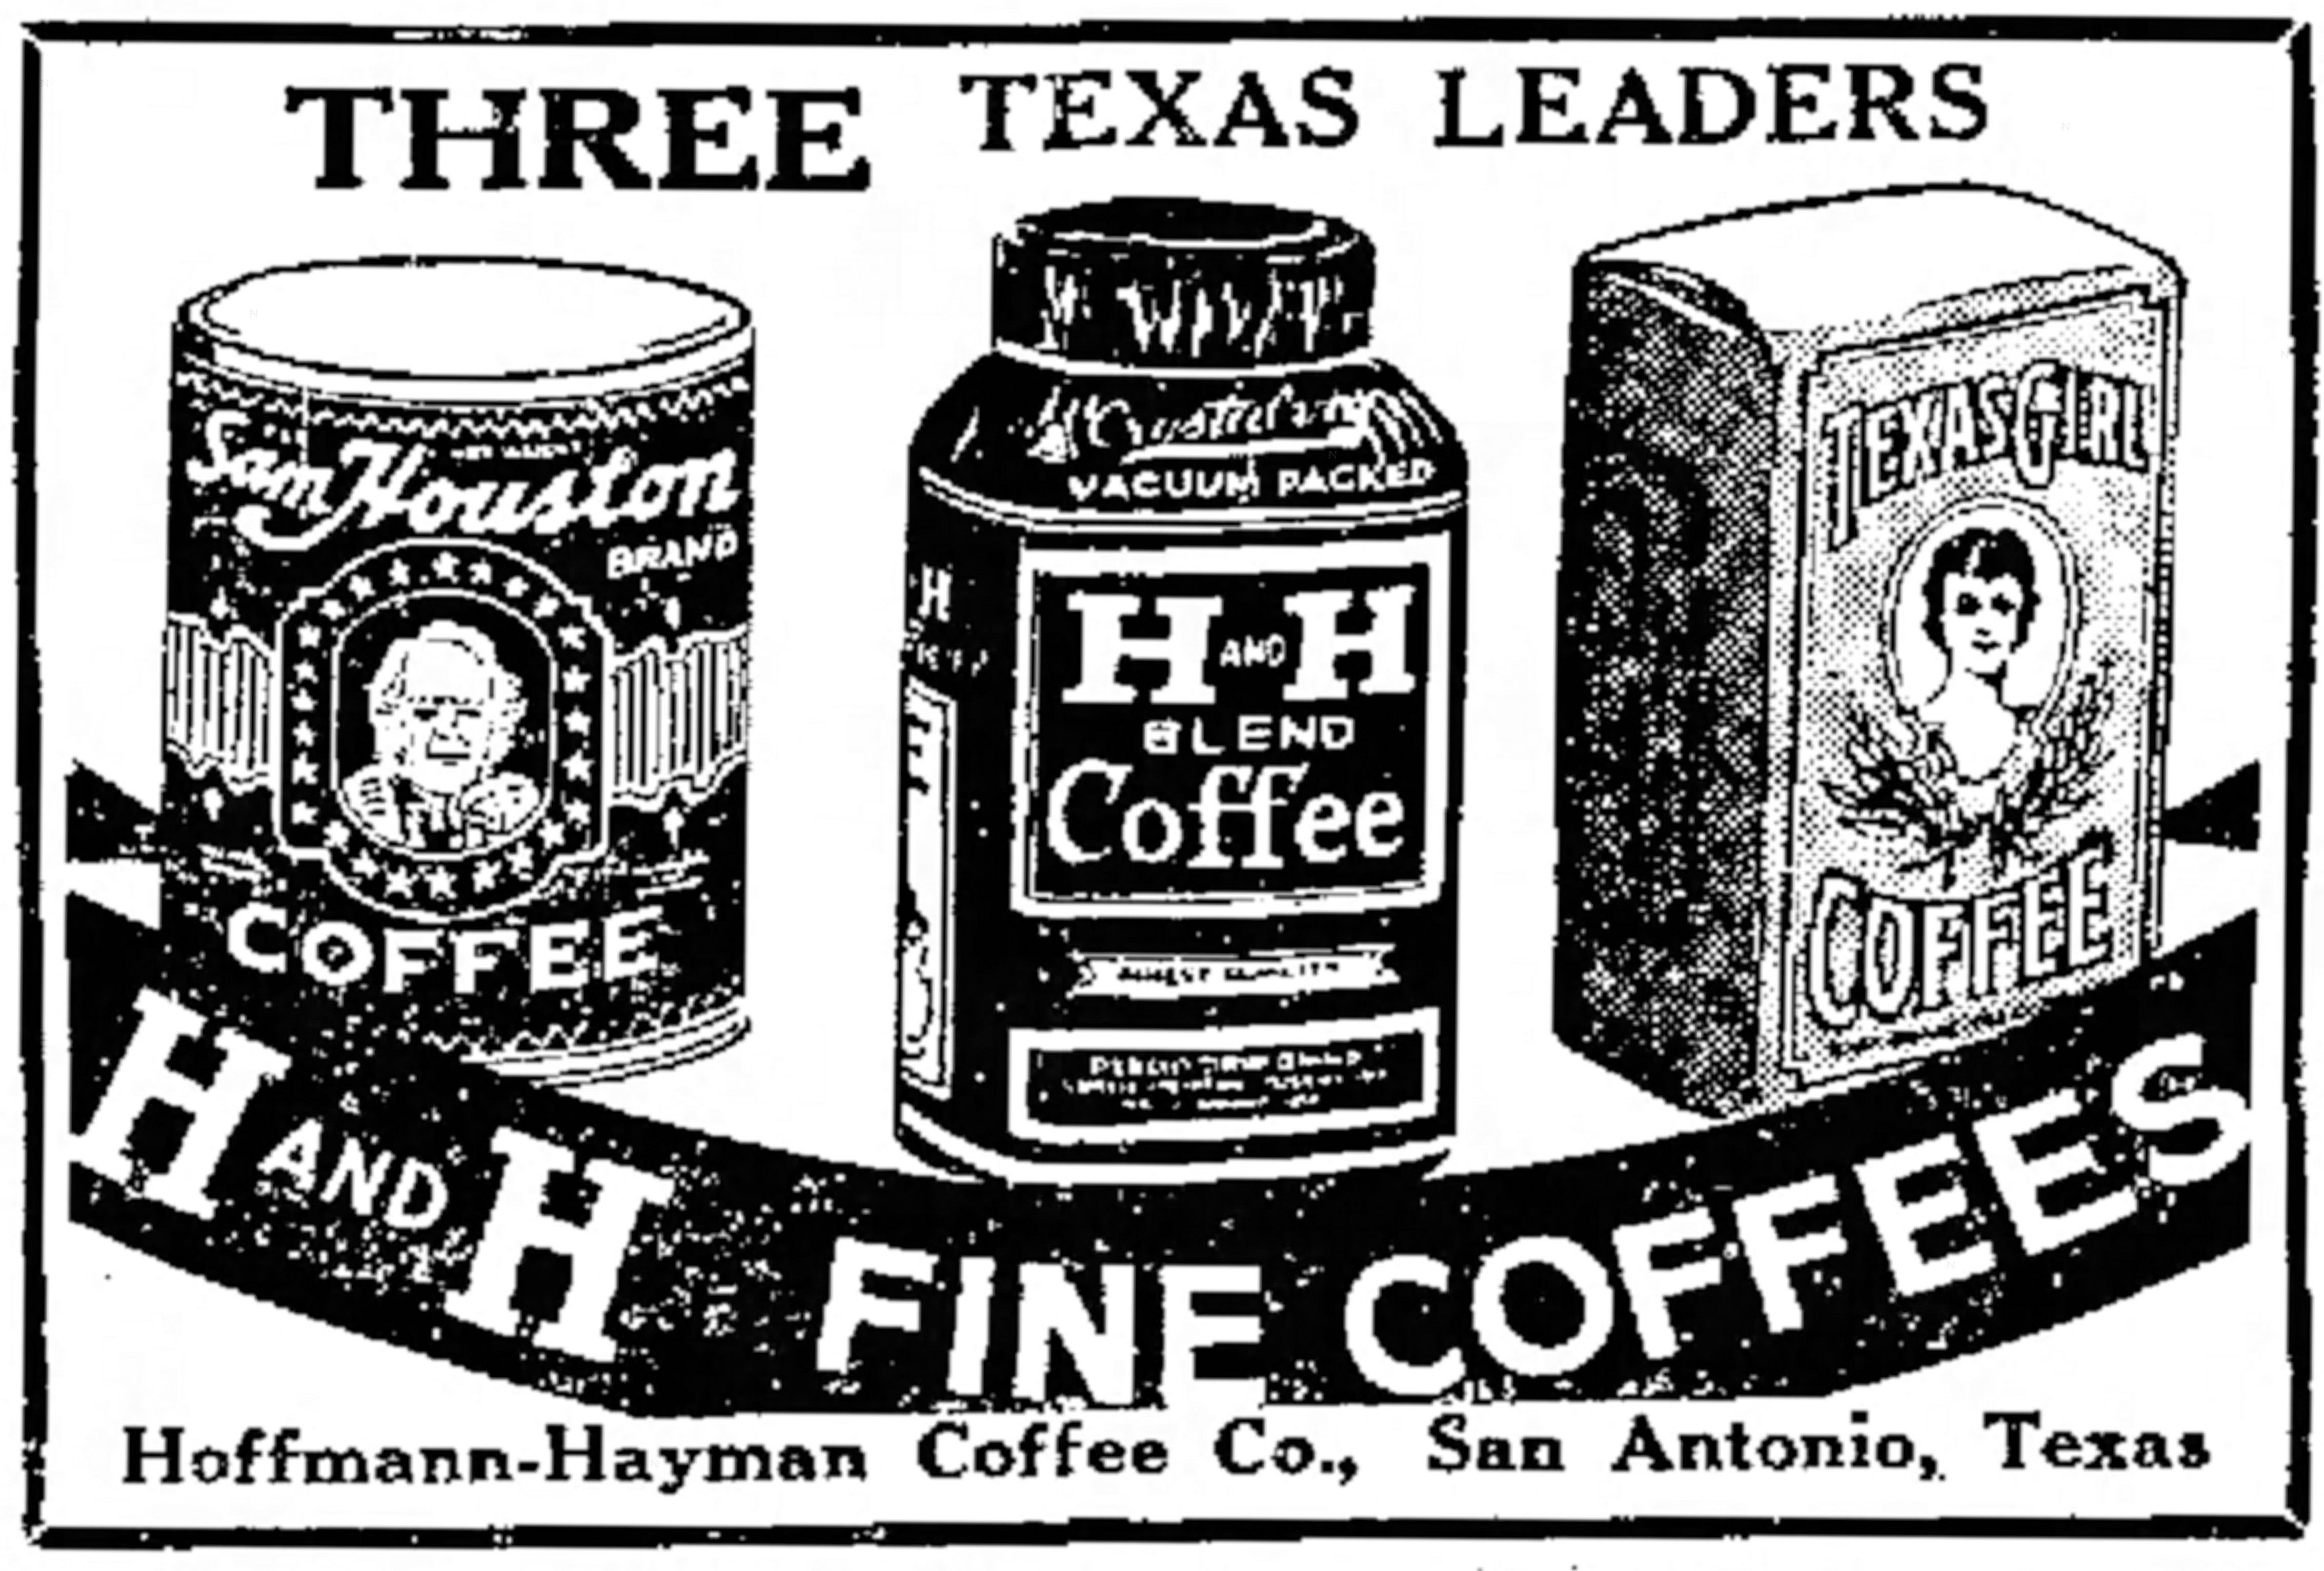 Sam Houston, H and H Blend, Texas Girl - Brownsville Herald on Tue Ap 16, 1935